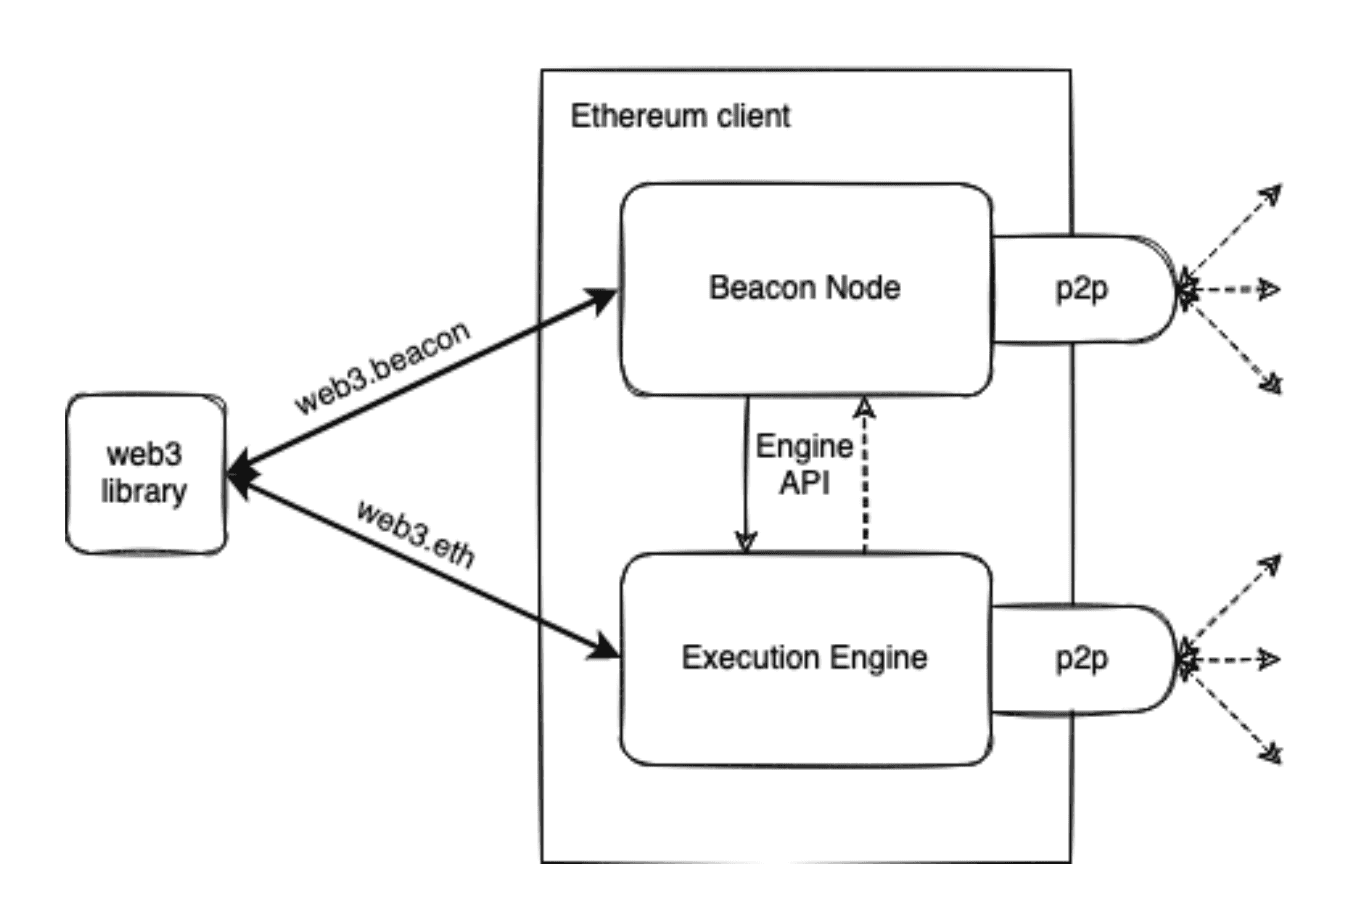 Diagraom of coupled execution and consensus clients